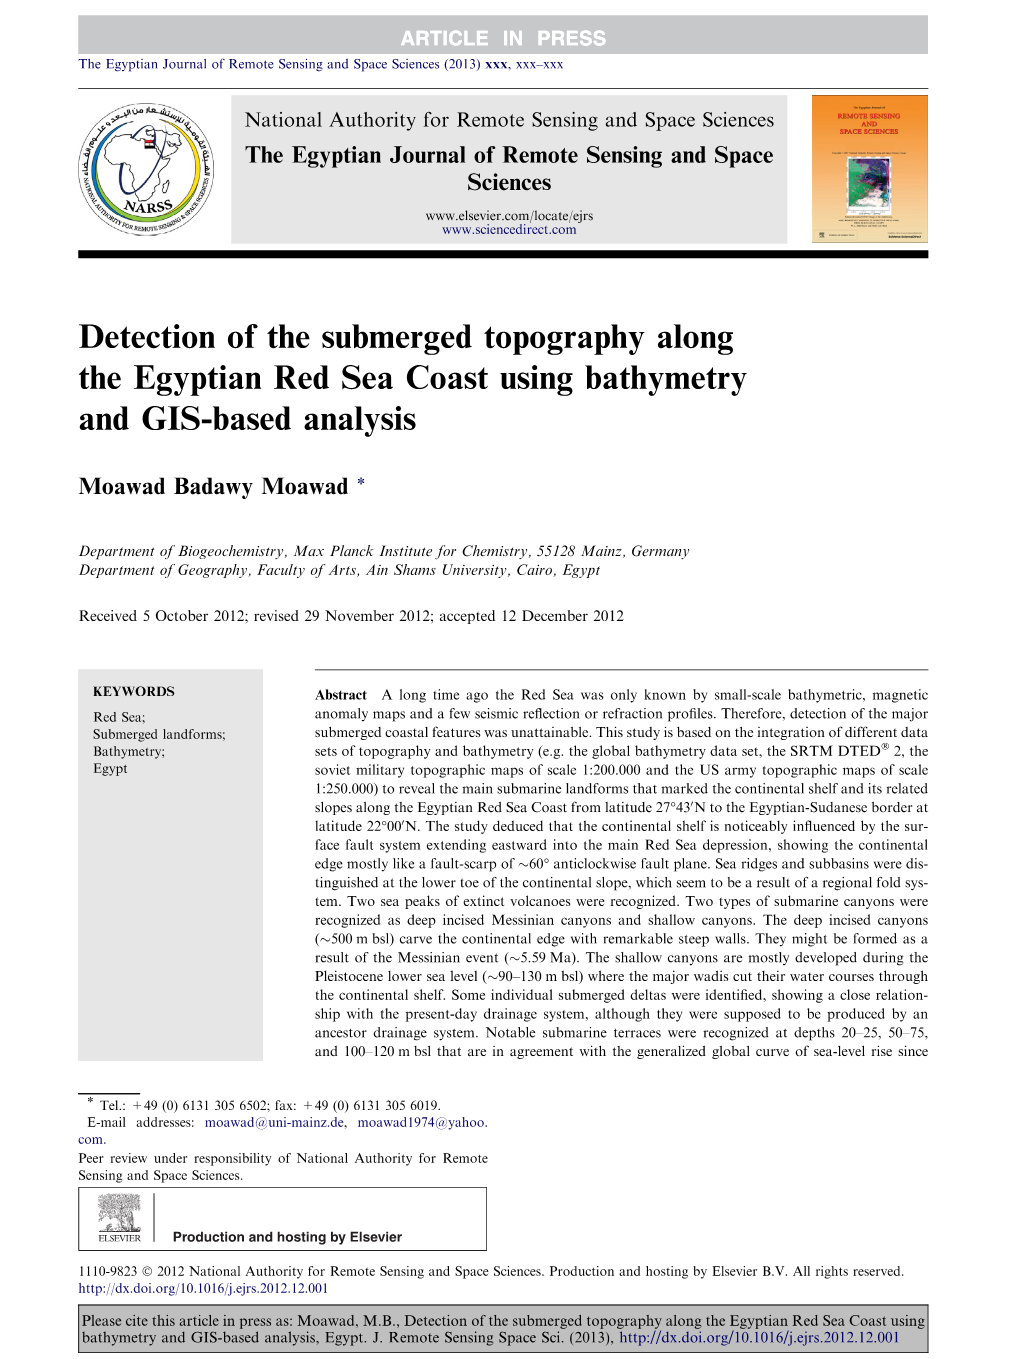 Detection of the Submerged Topography Along the Egyptian Red Sea Coast Using Bathymetry and GIS-Based Analysis